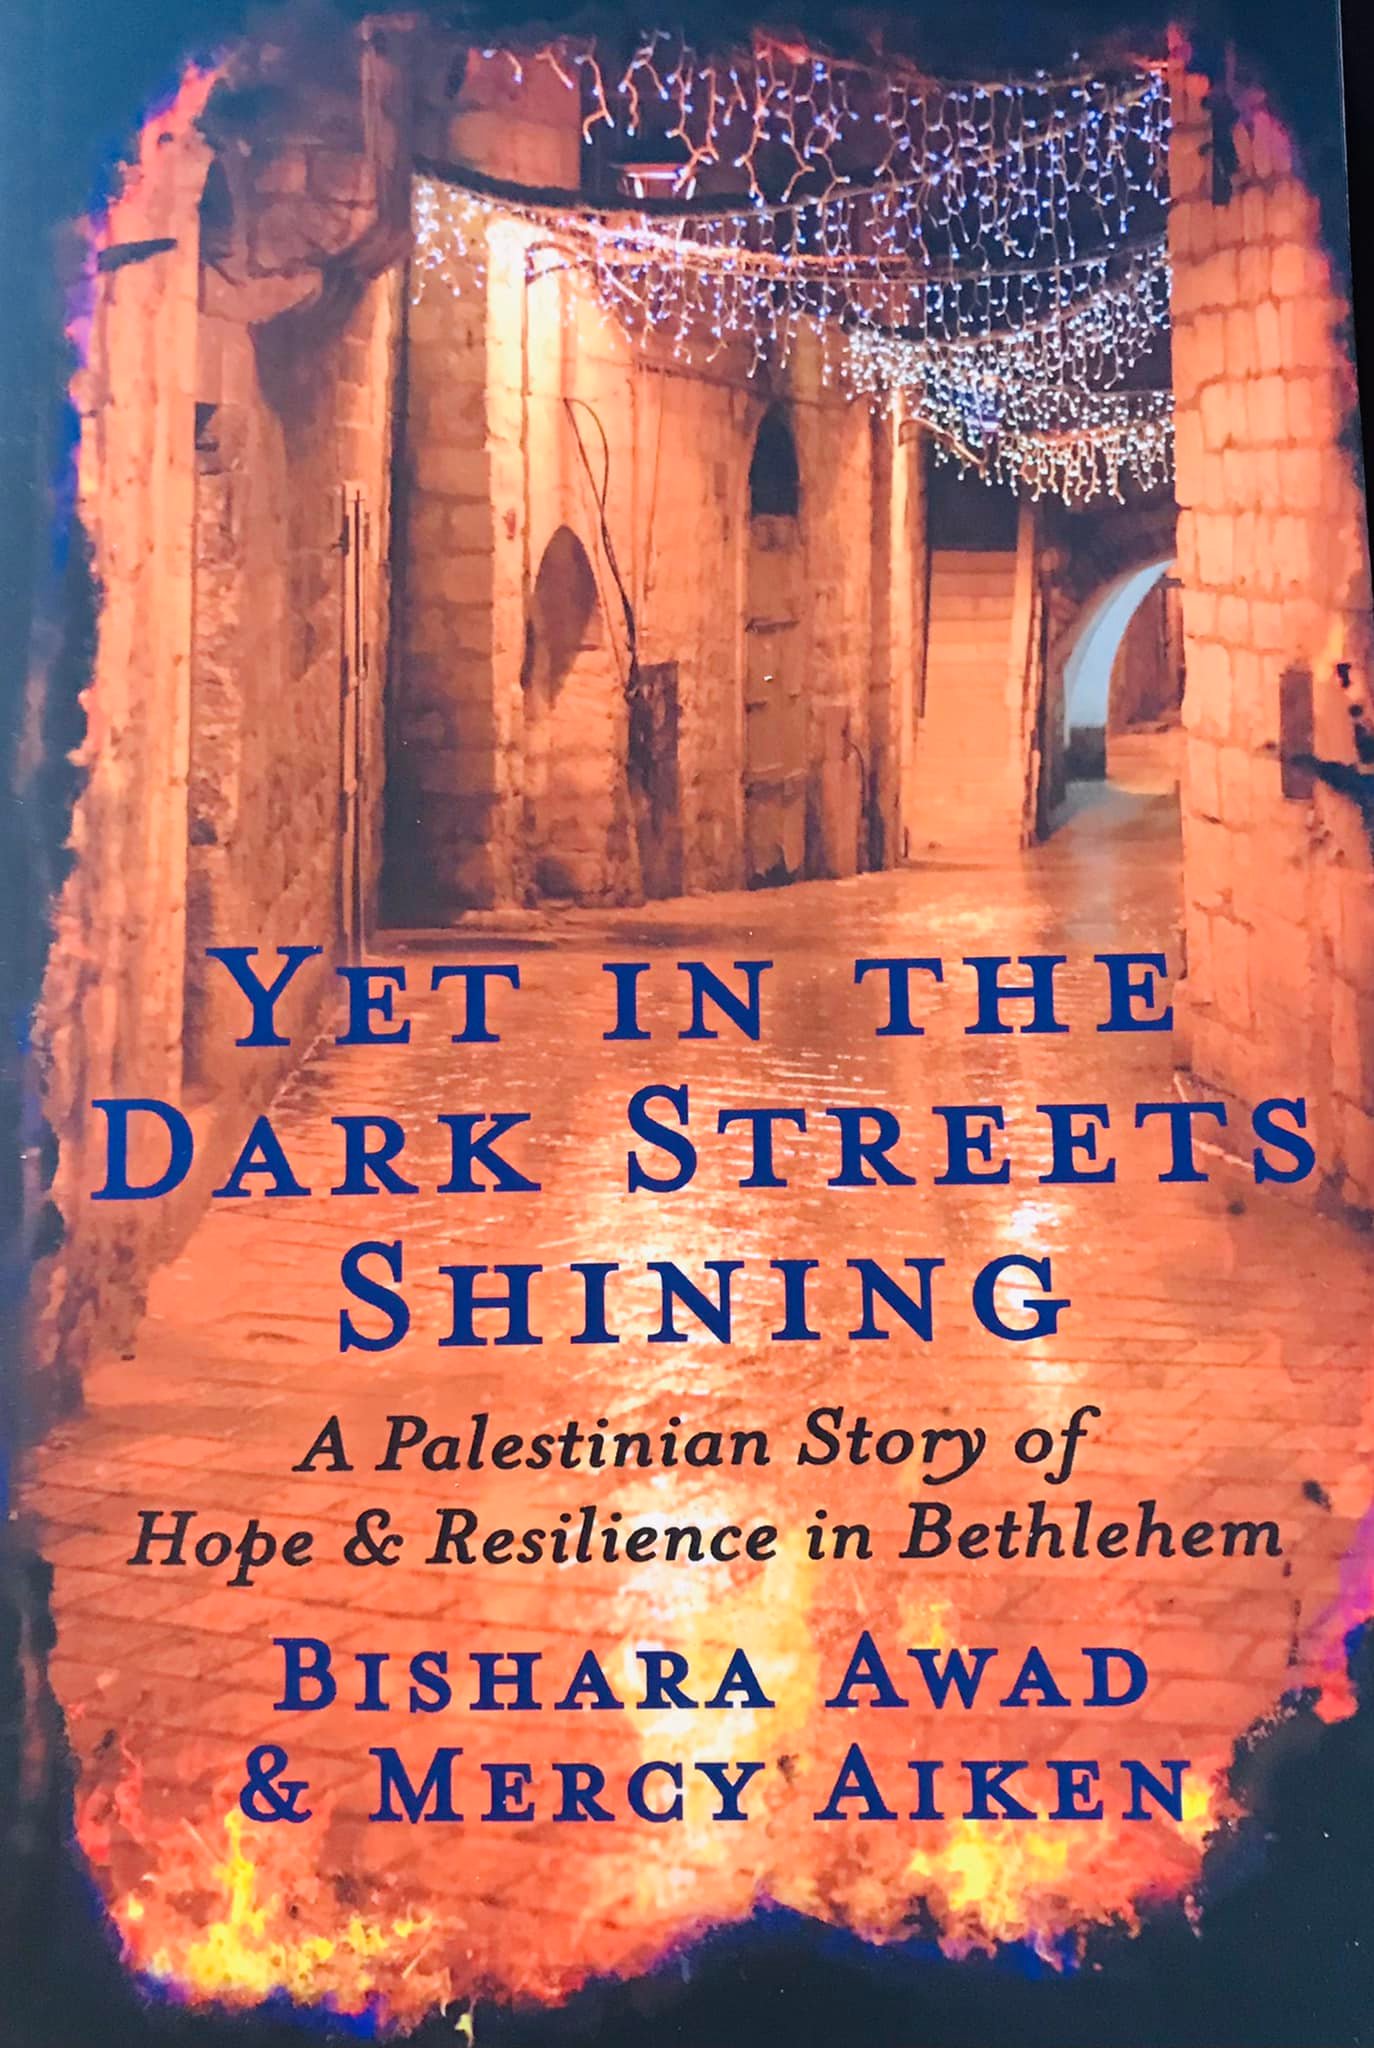 An Interview with Bishara Awad about His Autobiography Yet in the Dark Streets Shining